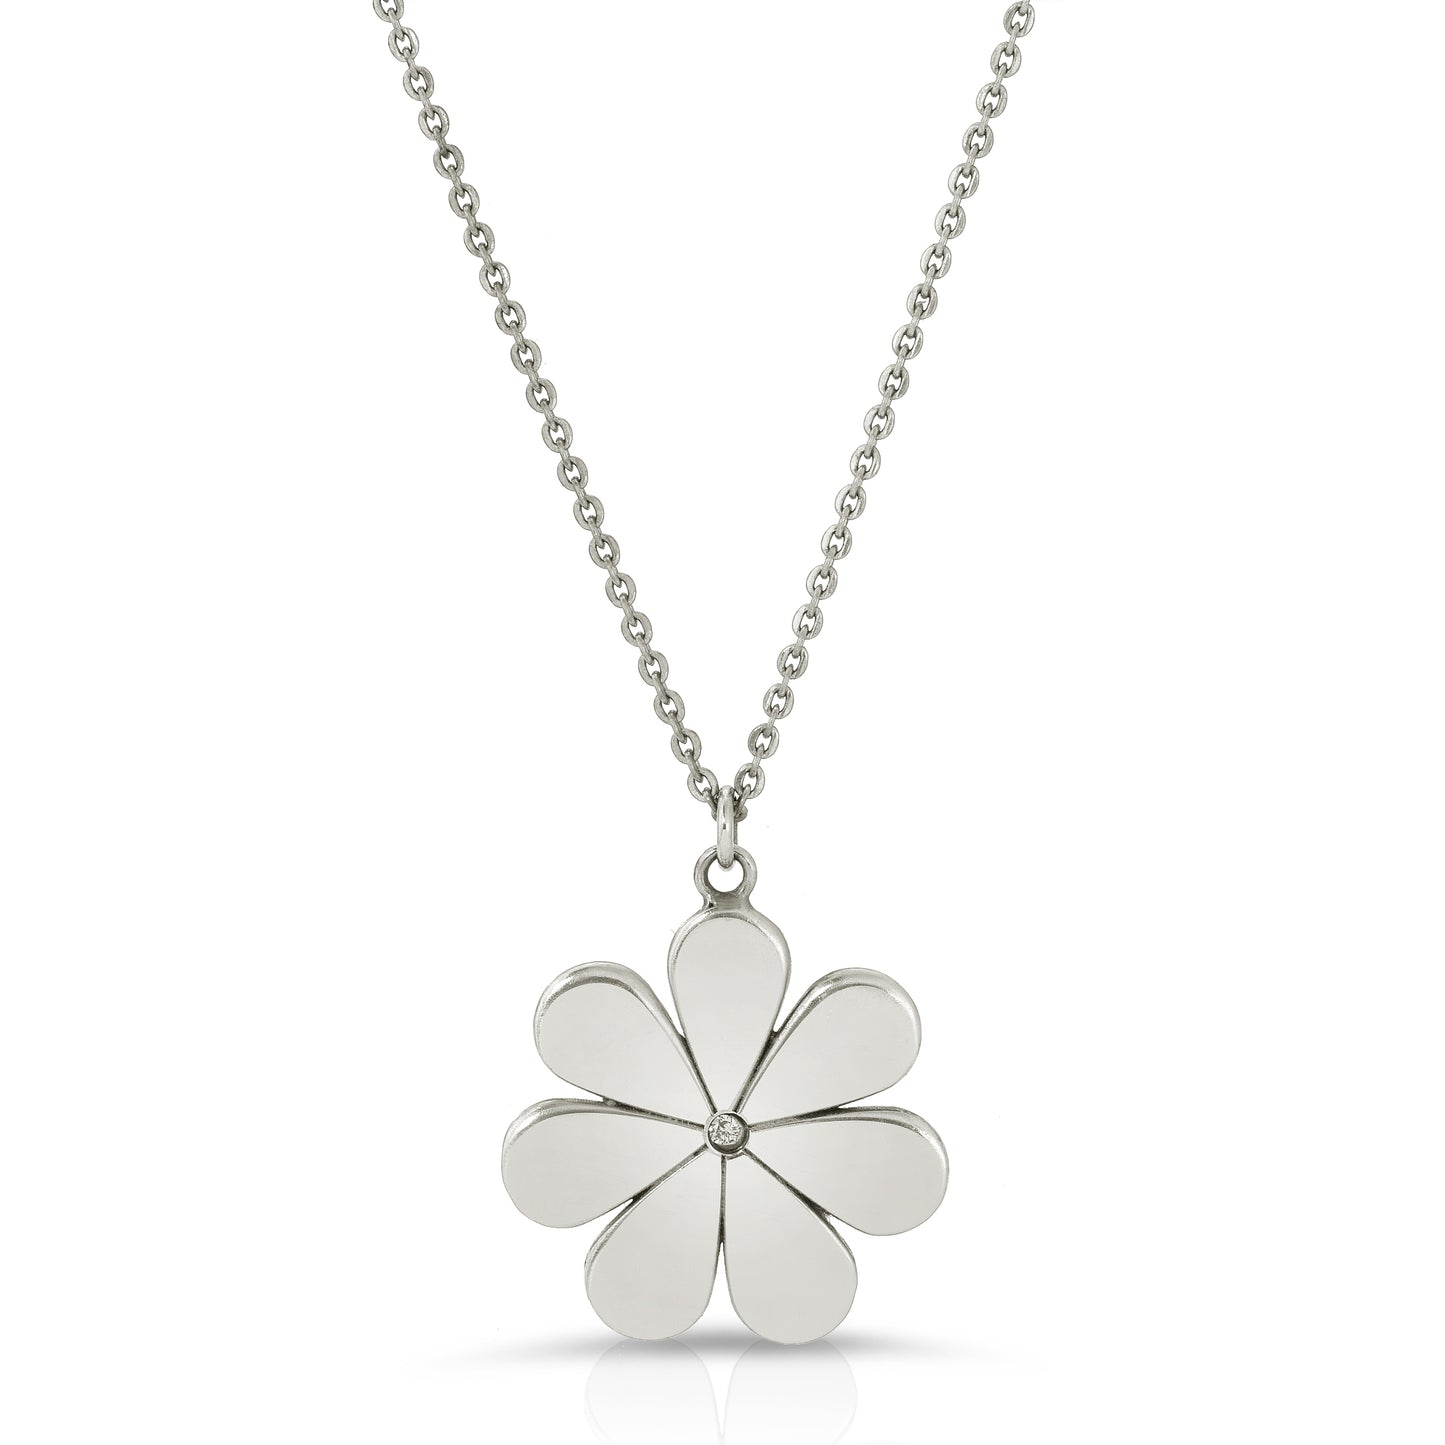 18K  solid gold 7 petal flower pendant necklace with a diamond in the middle from the wandering jewel